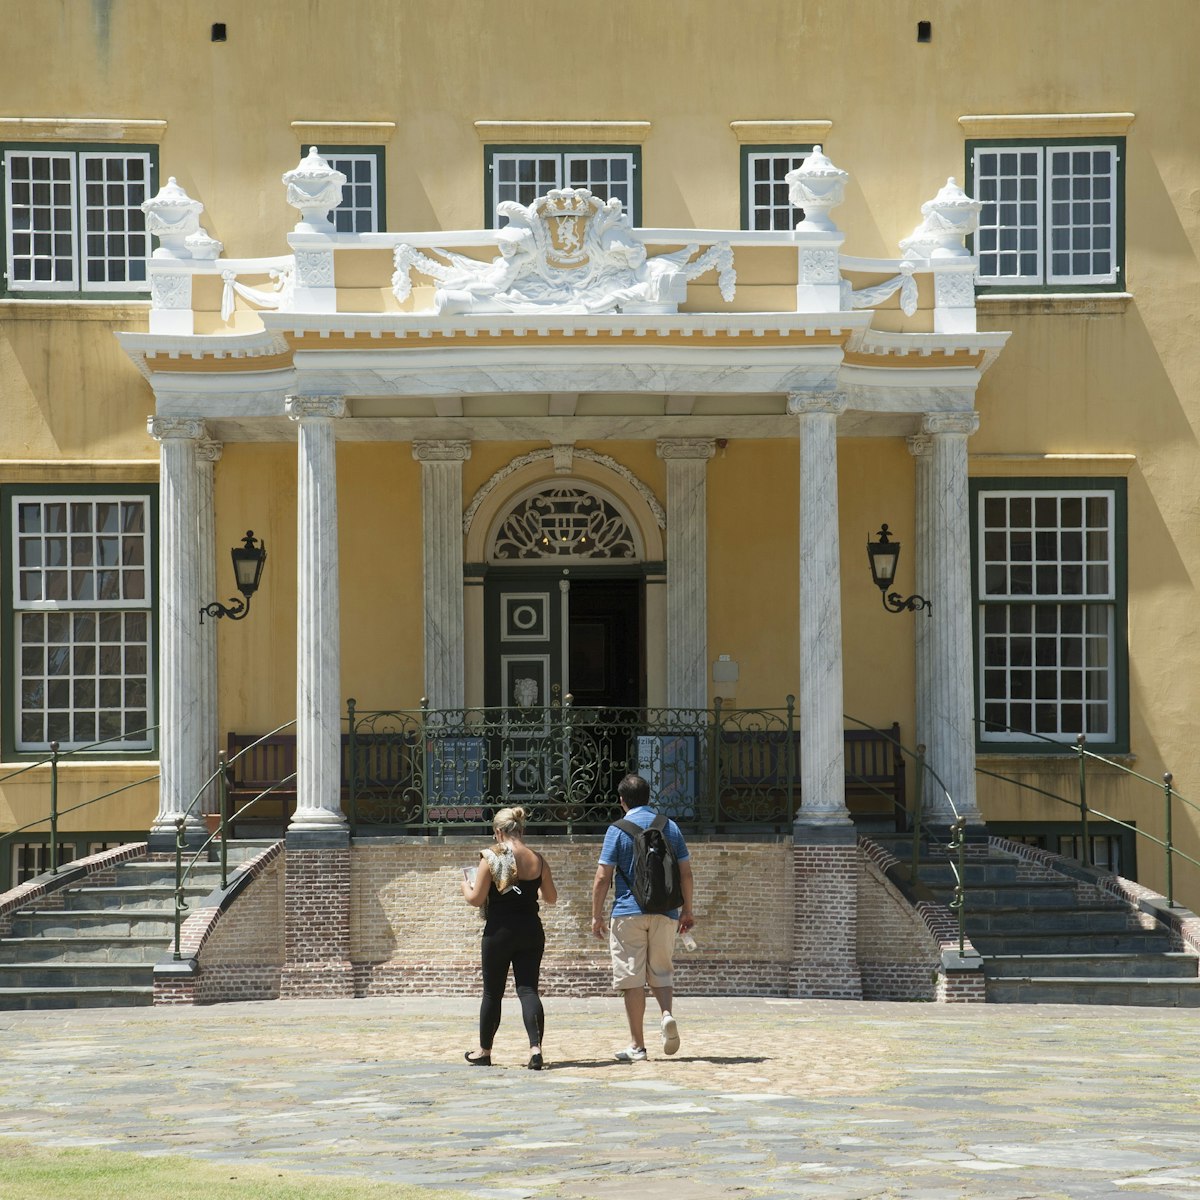 The Castle of Good Hope Cape Town South Africa. Oldest surviving Colonial building in South Africa. (Photo by: Education Images/UIG via Getty Images)